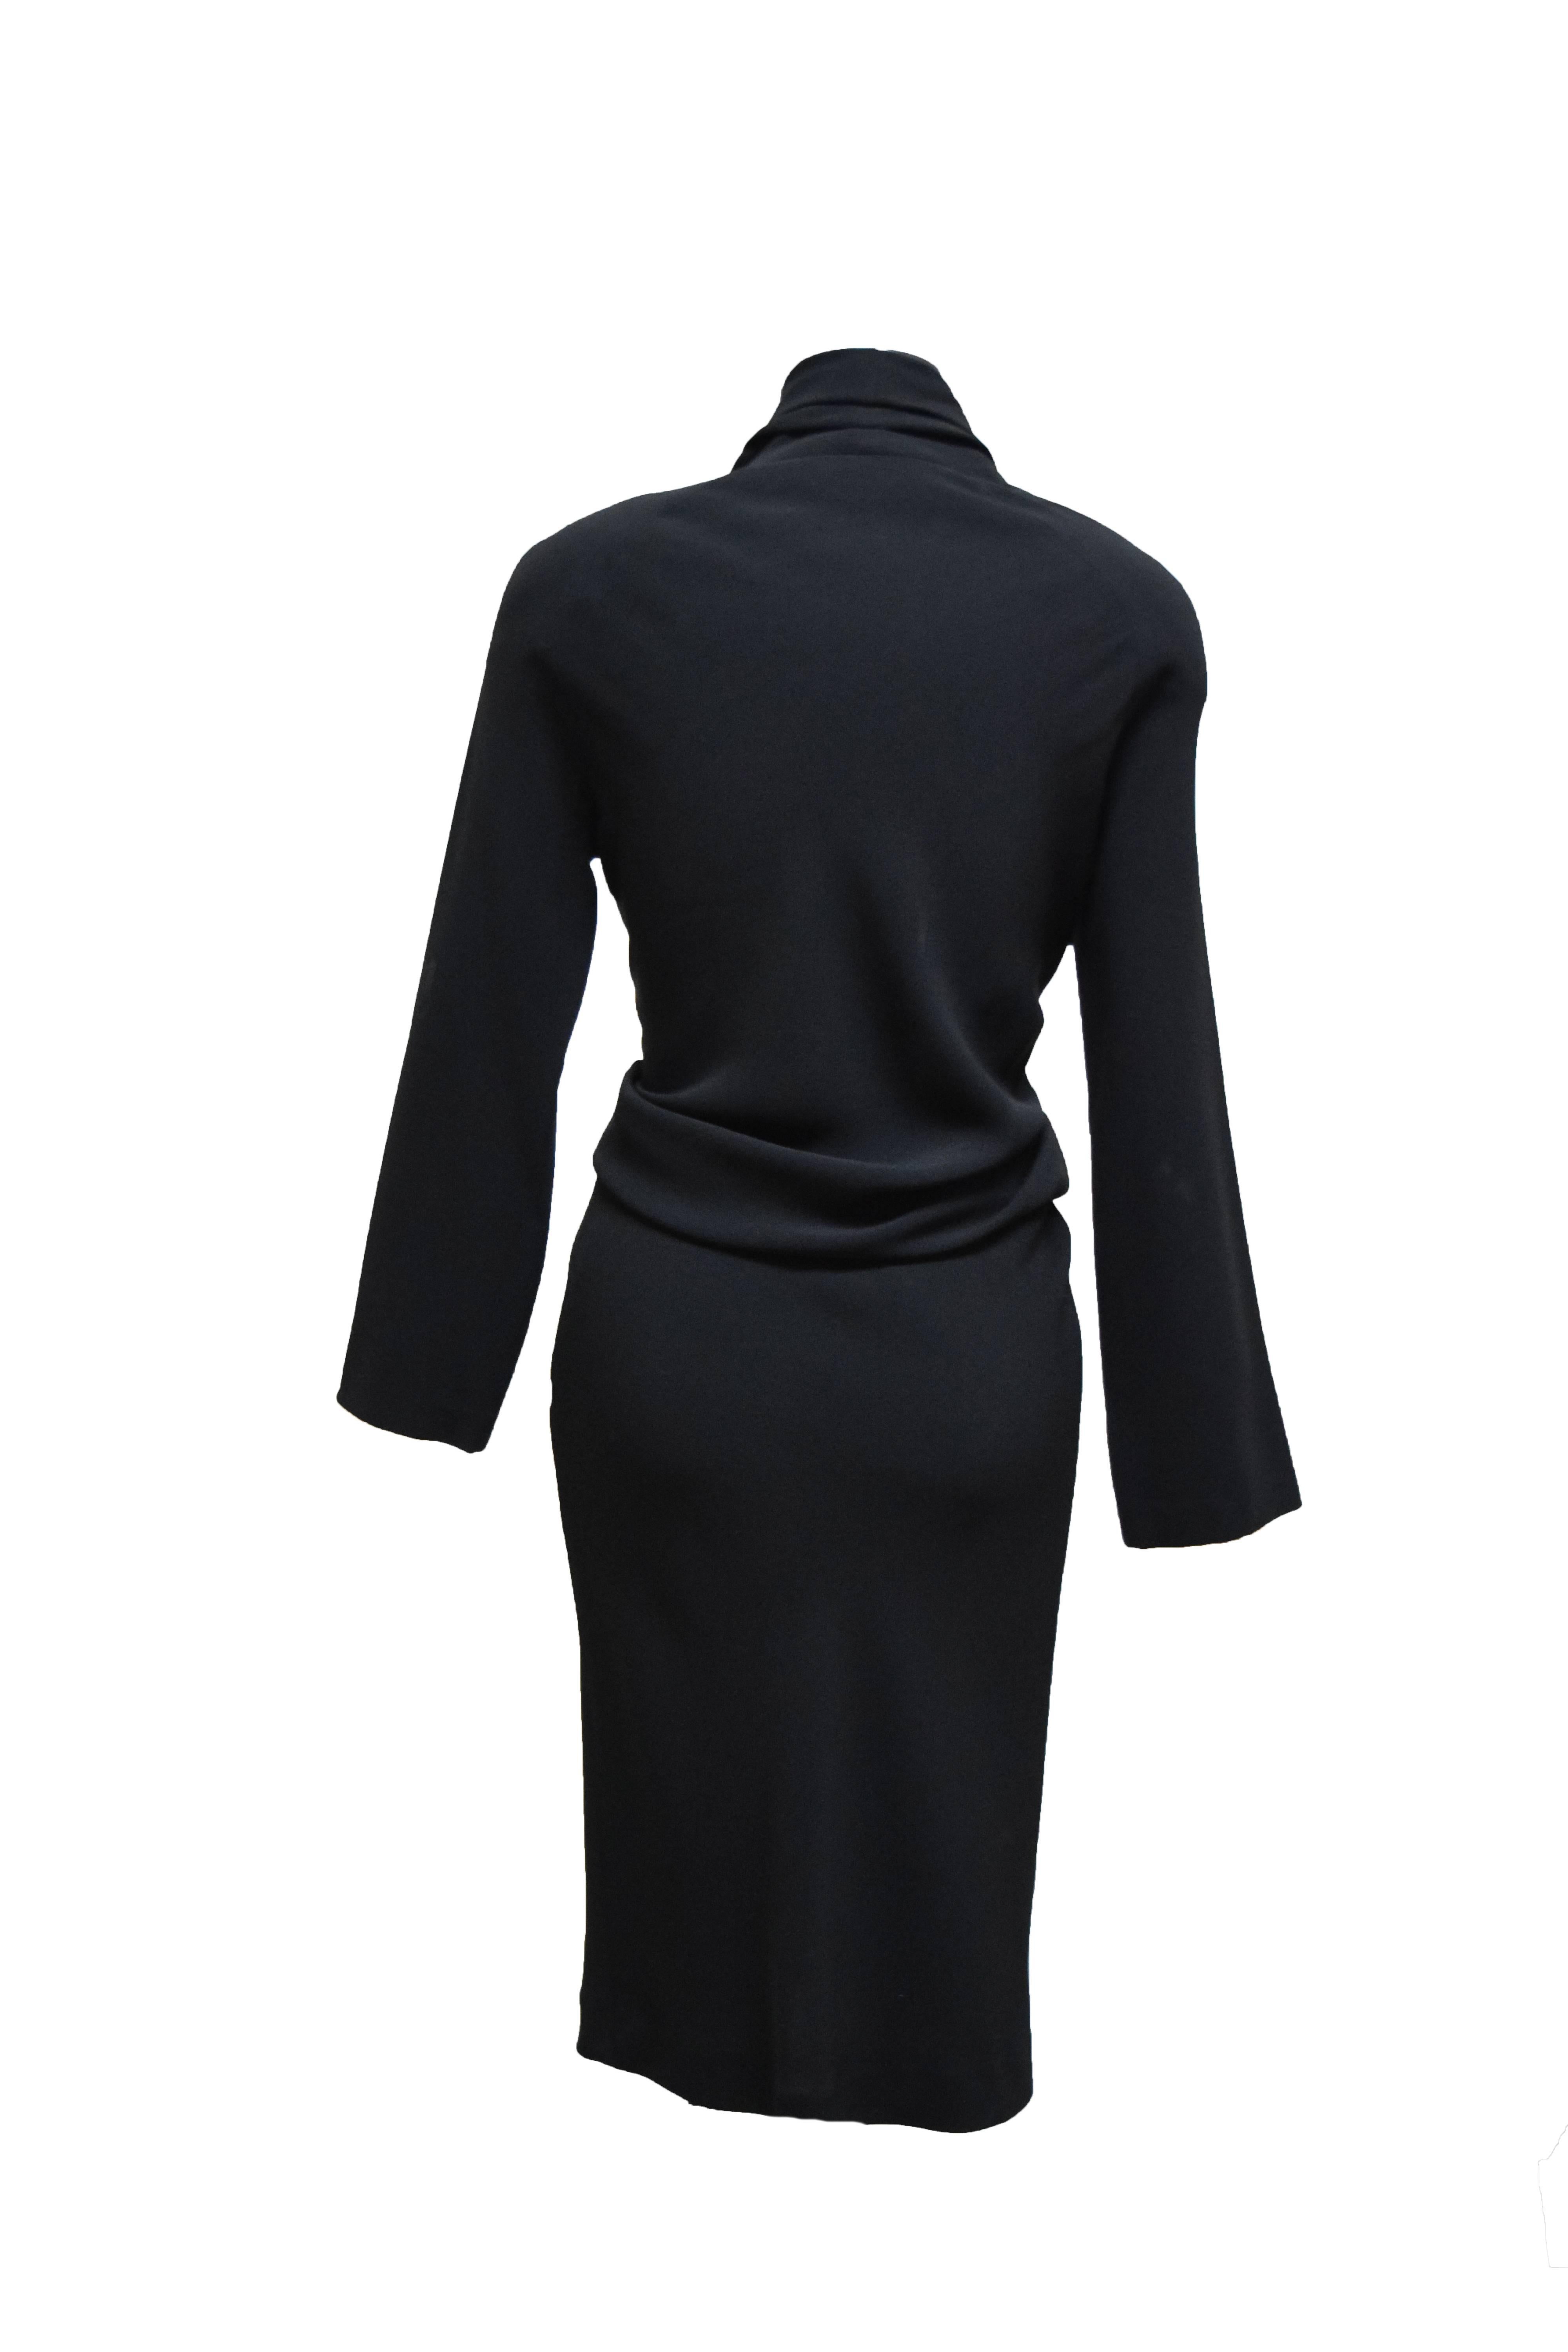 This Donna Karan Dress is a shirt waisted cocktail dress with a body-con skirt and long sleeves. The neckline is a button down, and has a slight v shape.